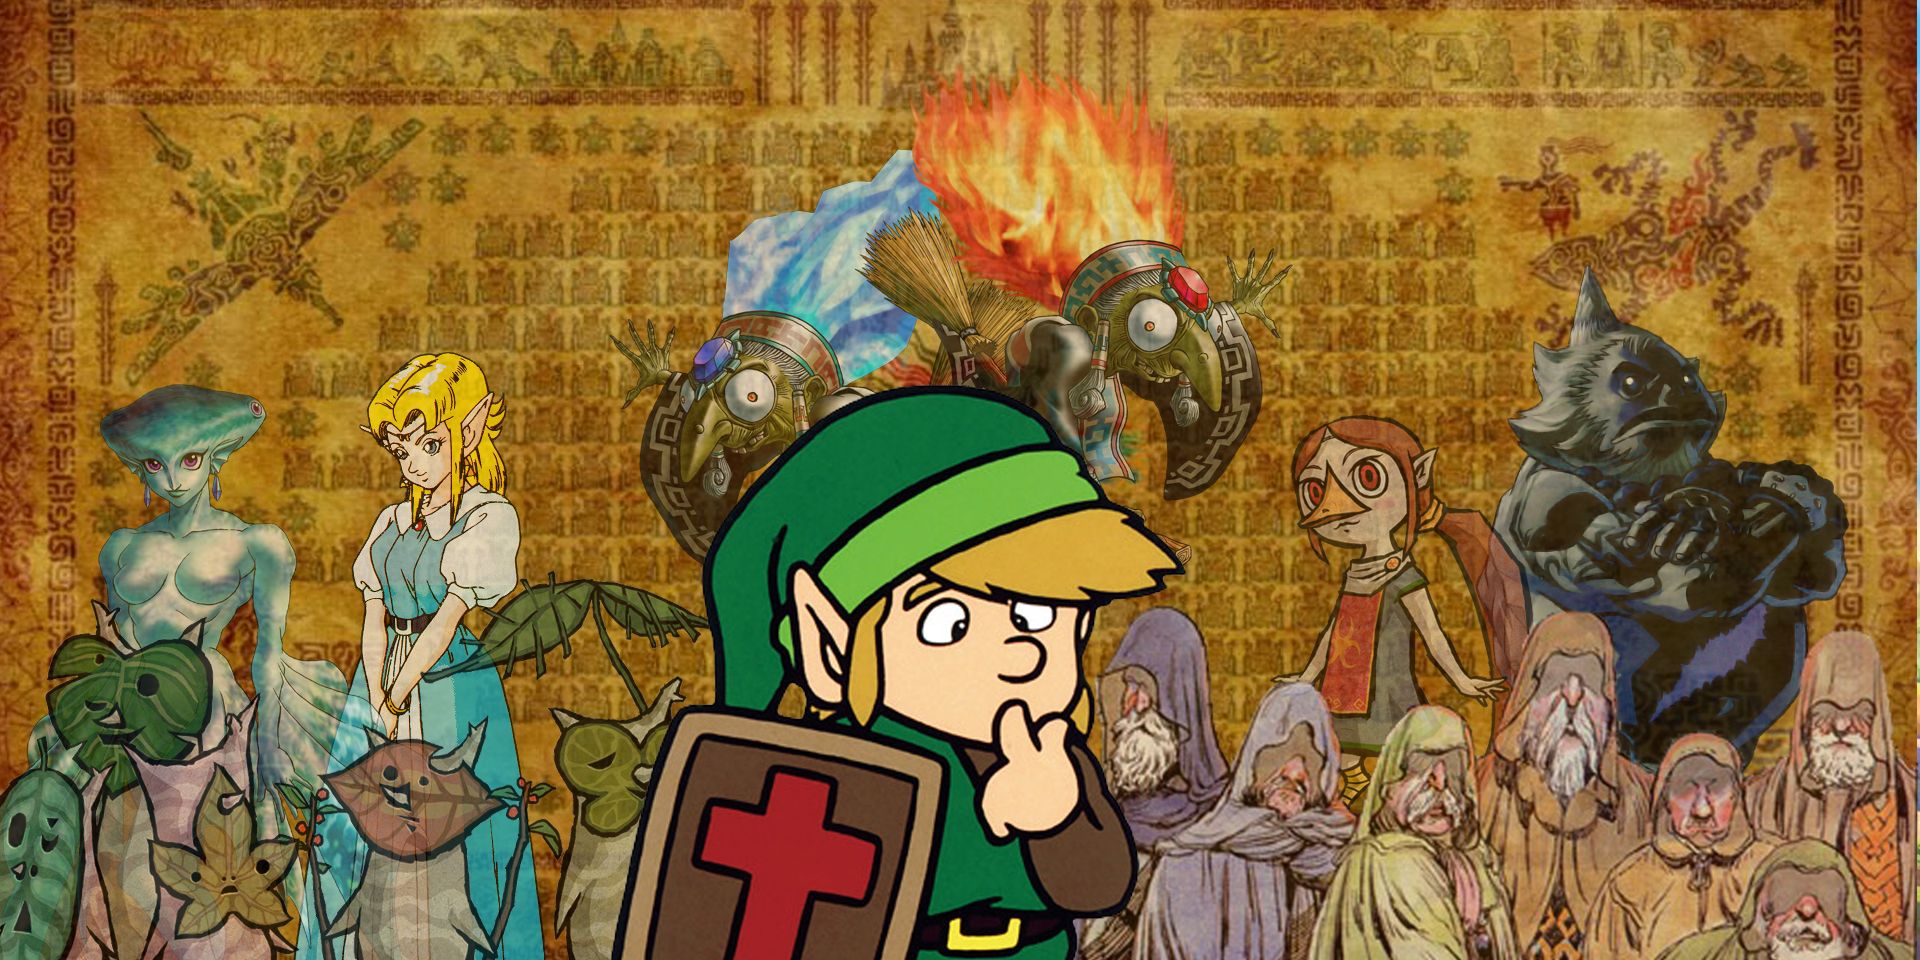 Link ponders in front of the large cast of characters.